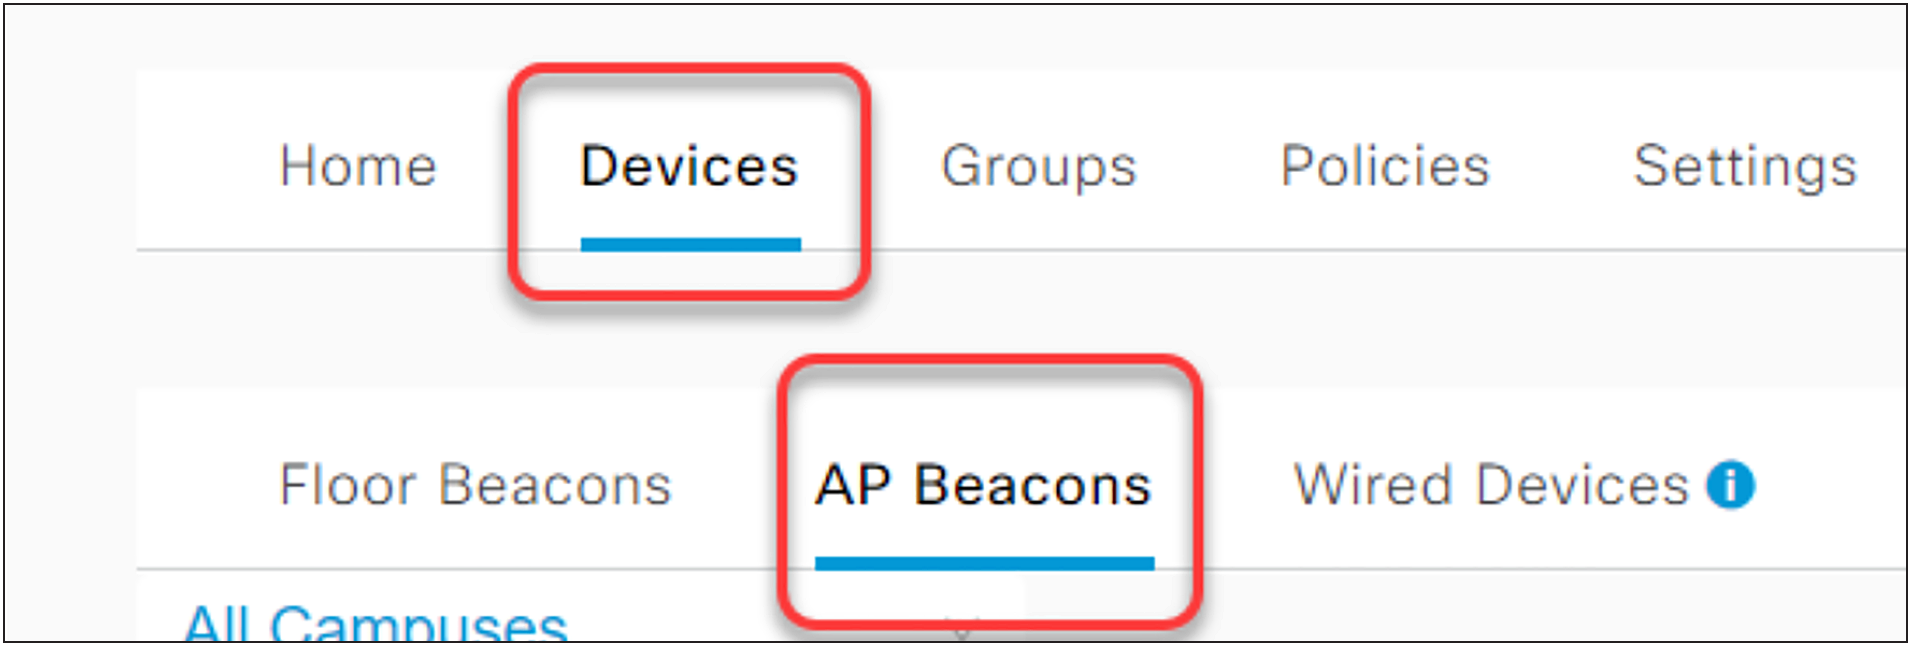 Cisco Spaces bulk-enable or disable of BLE or sensor capabilities.